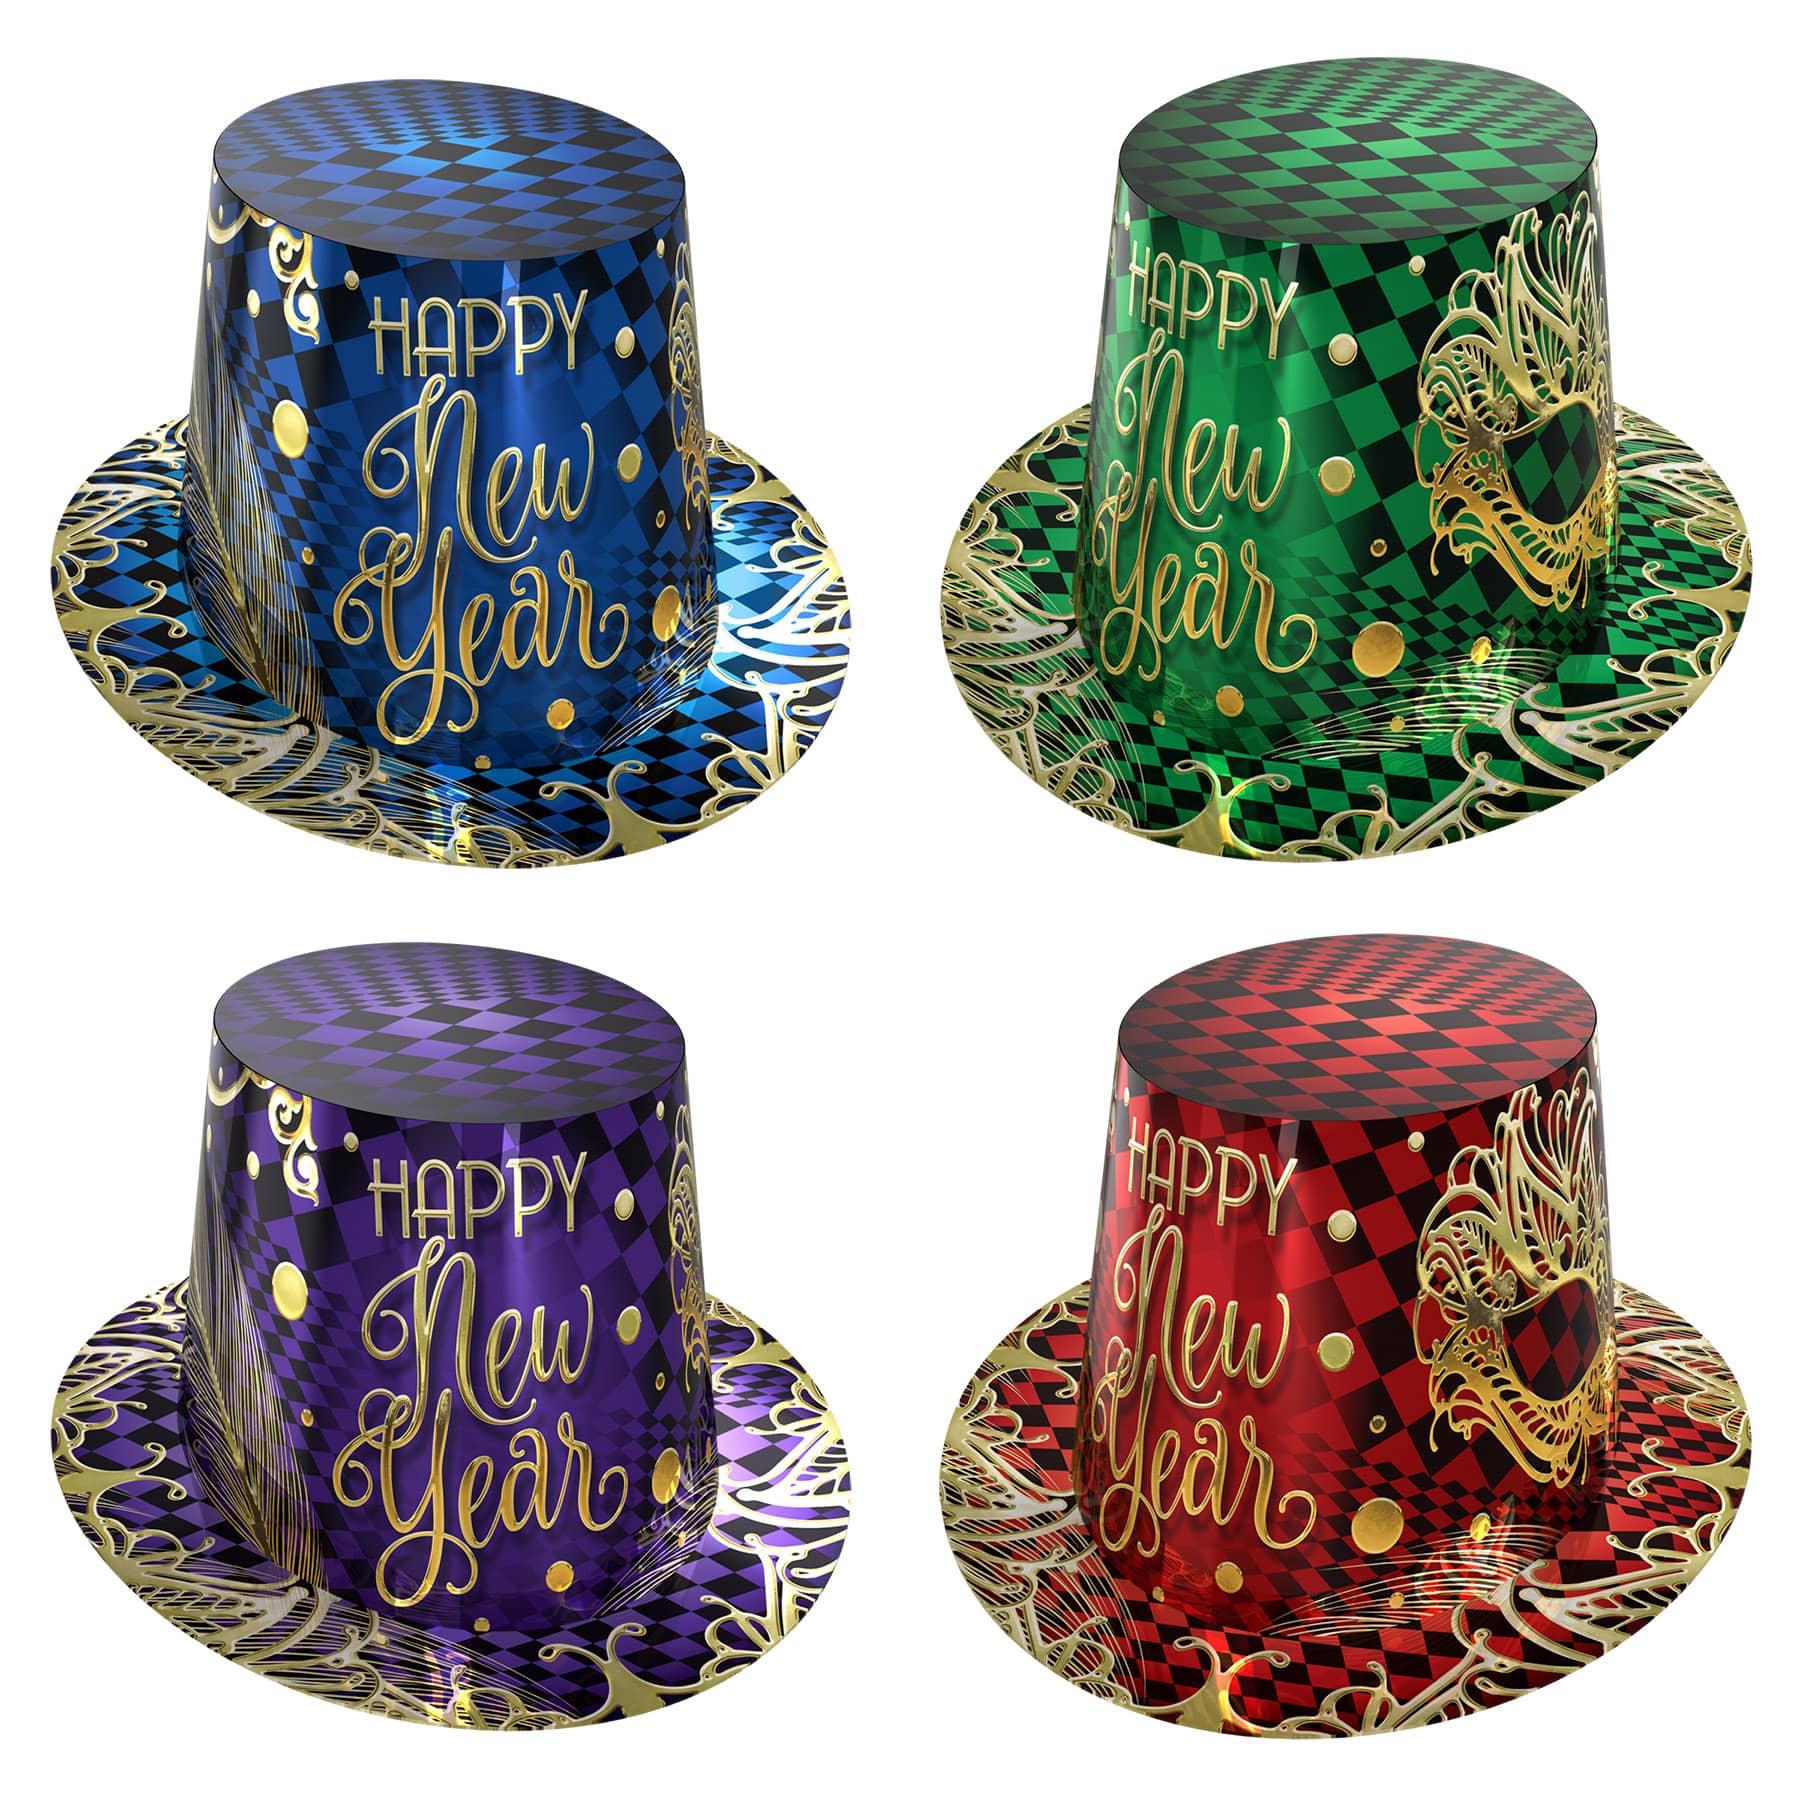 Cardstock hi-hats in red, green, blue and purple with white happy new year lettering and masquerade masks